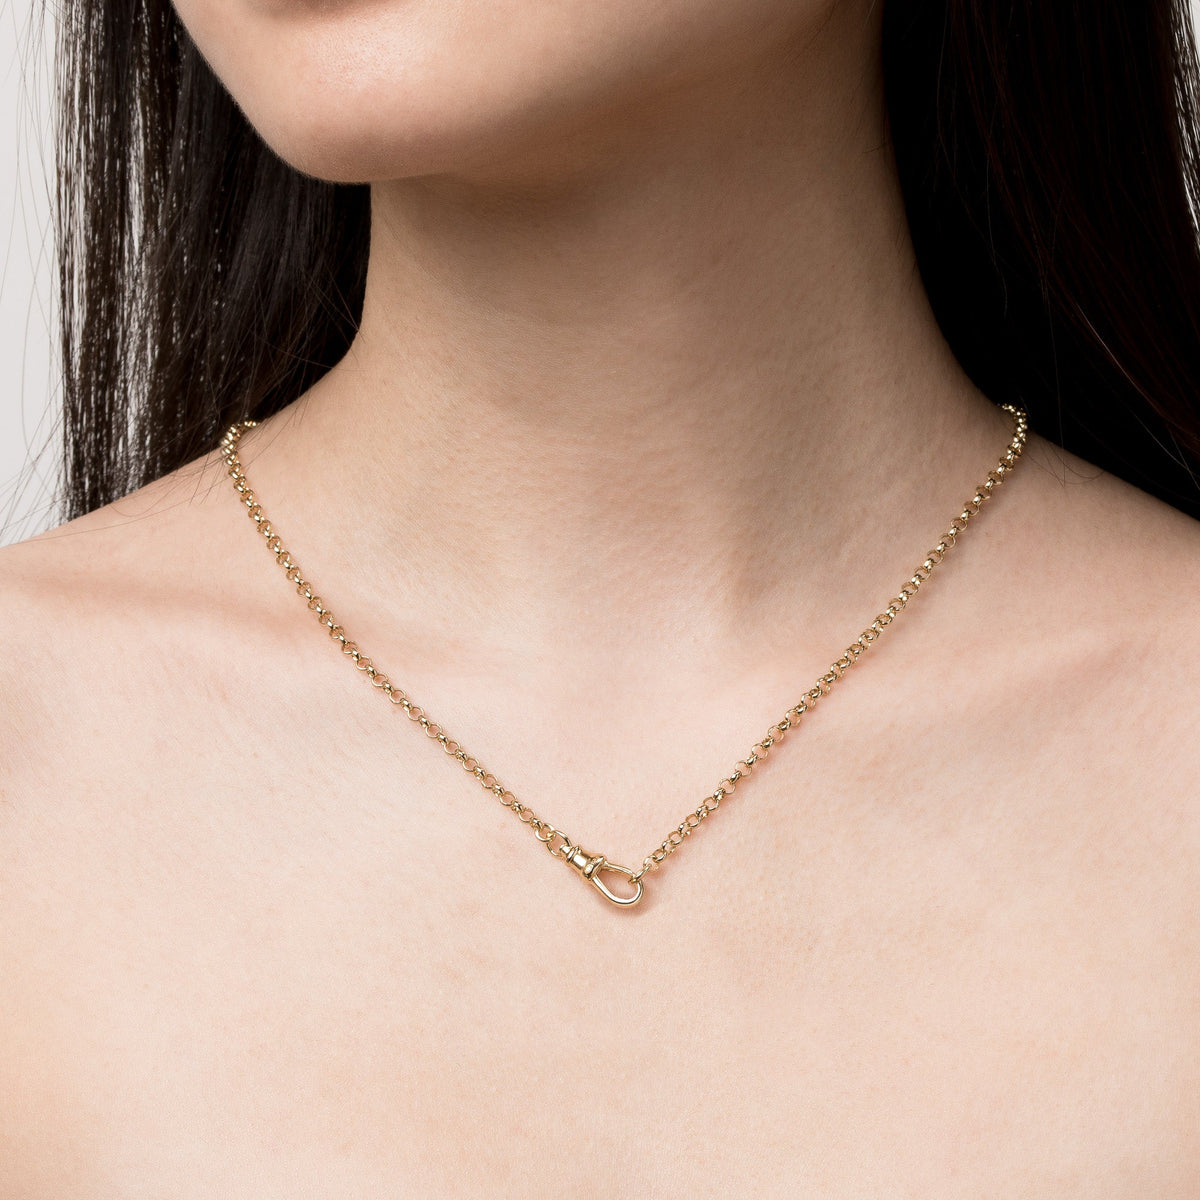 Gold Rolo Chain Necklace in Yellow, Rose or White Gold